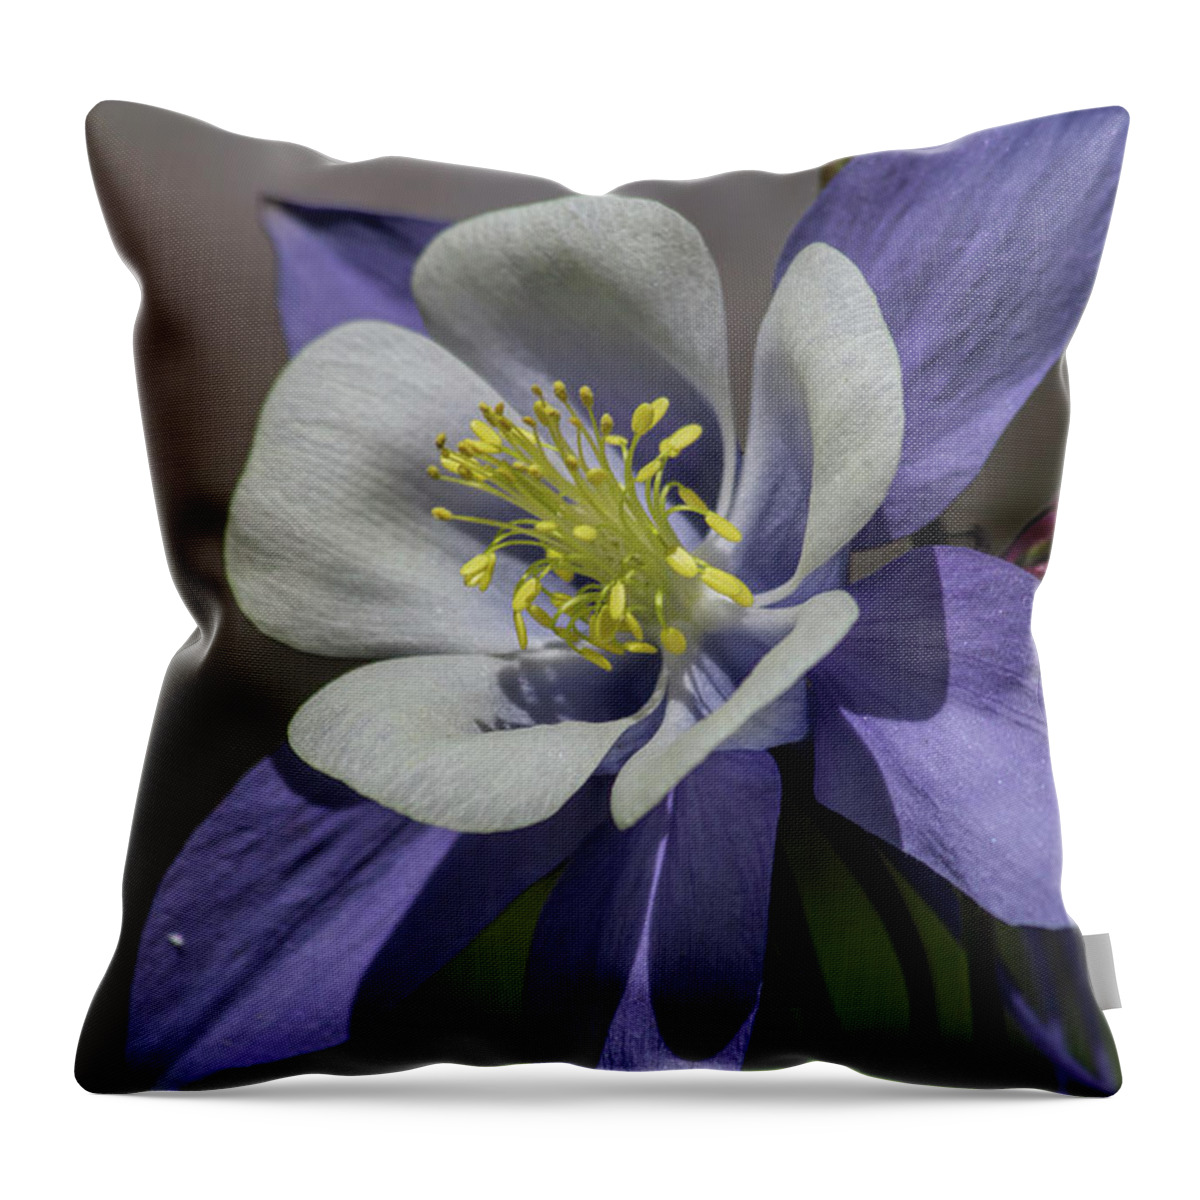 Flower Throw Pillow featuring the photograph Columbine Blues by Alana Thrower